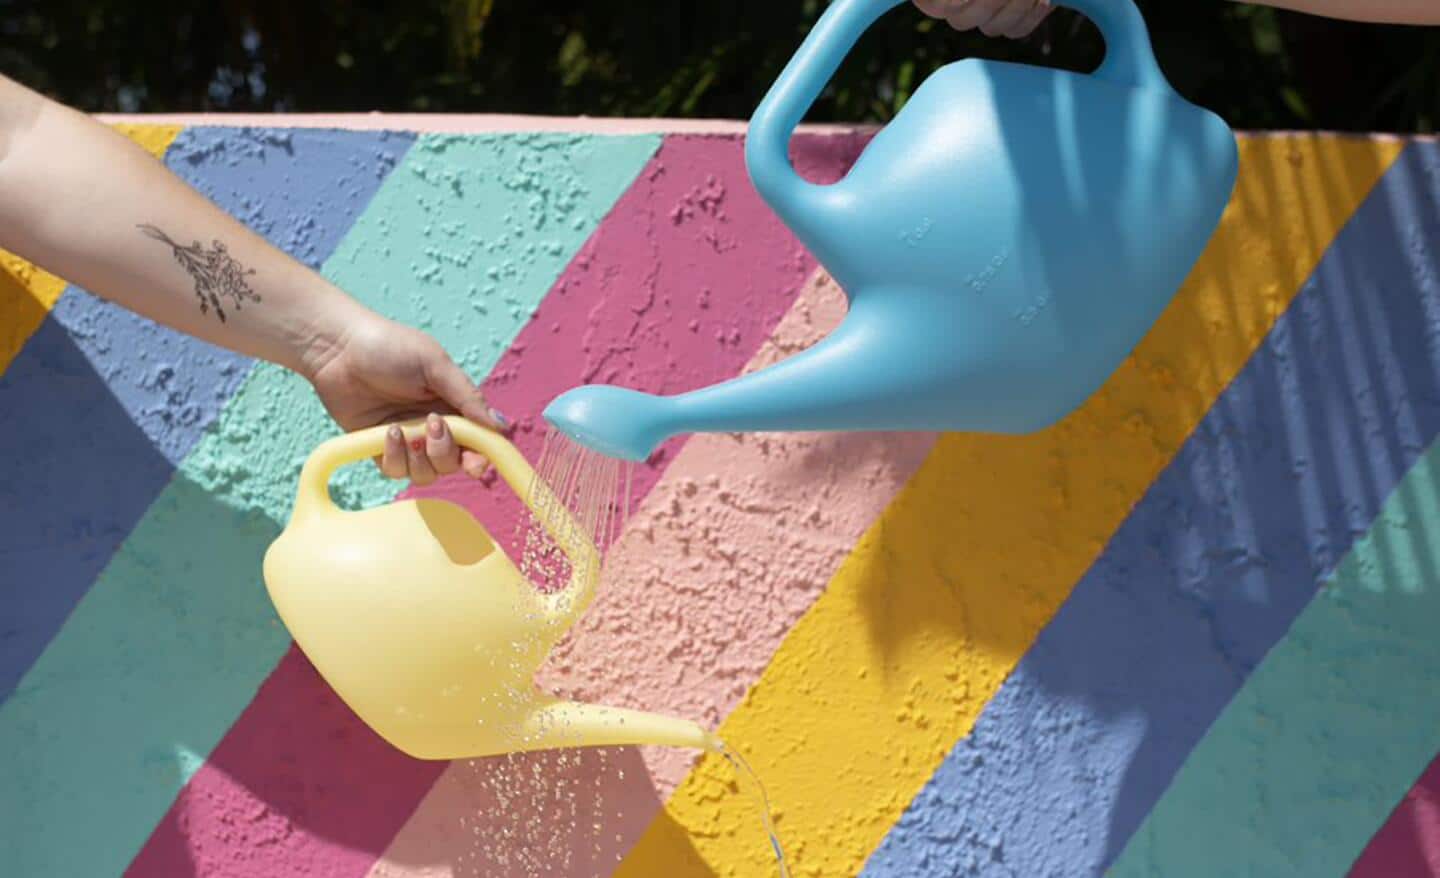 A yellow and a green watering can against a colorful wall